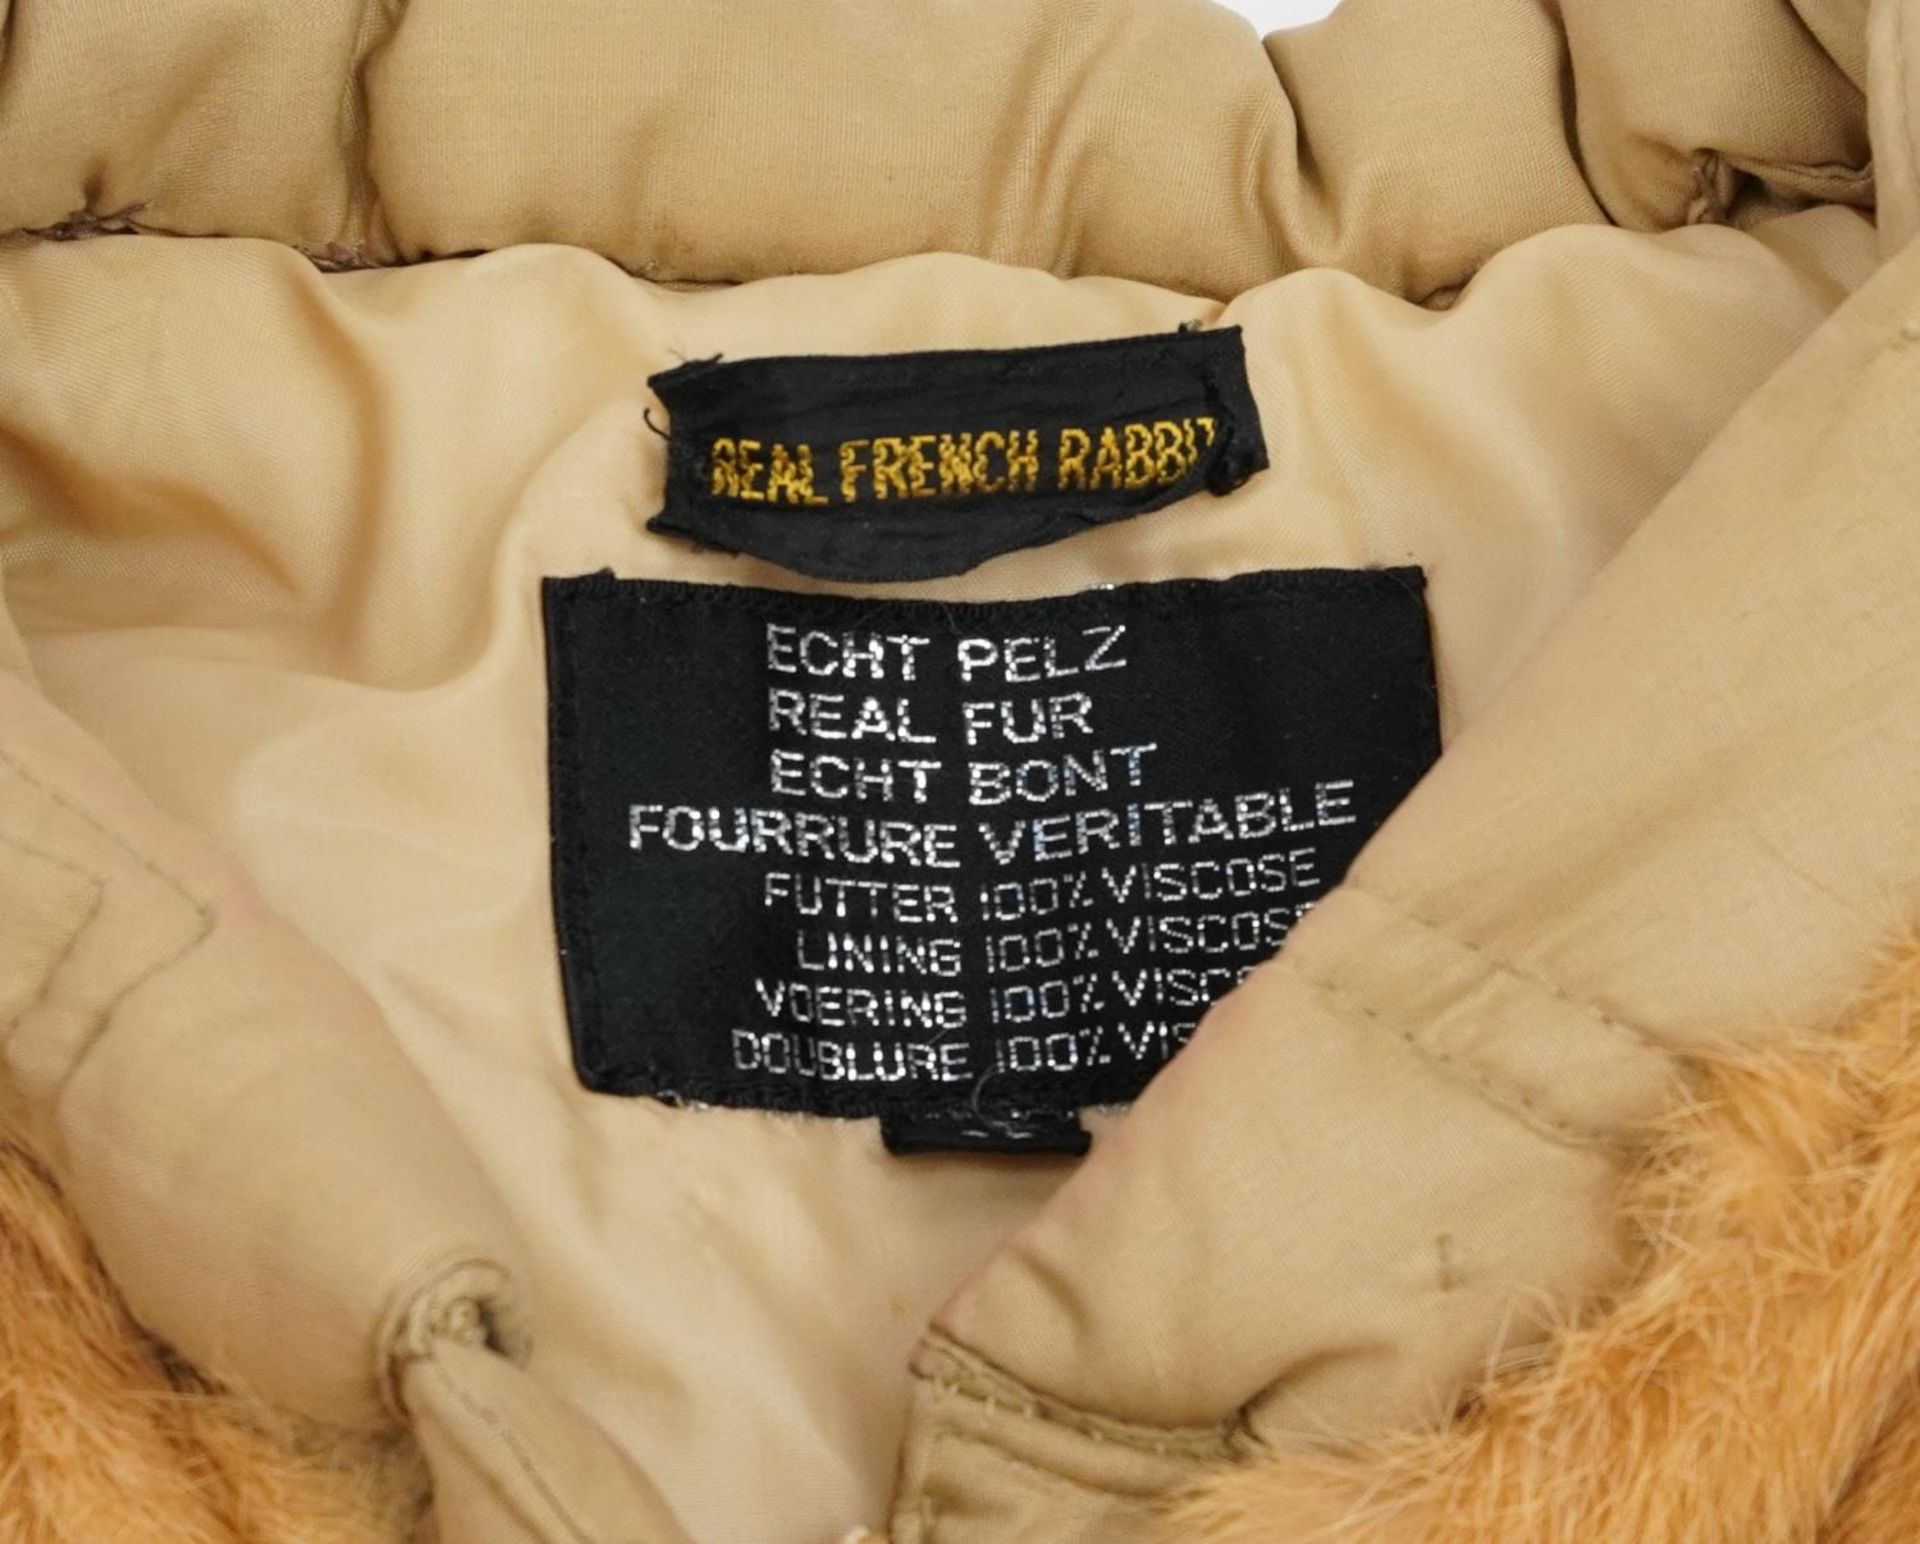 Collection of fur jackets, stoles and hats including a French rabbit fur jacket - Image 5 of 5